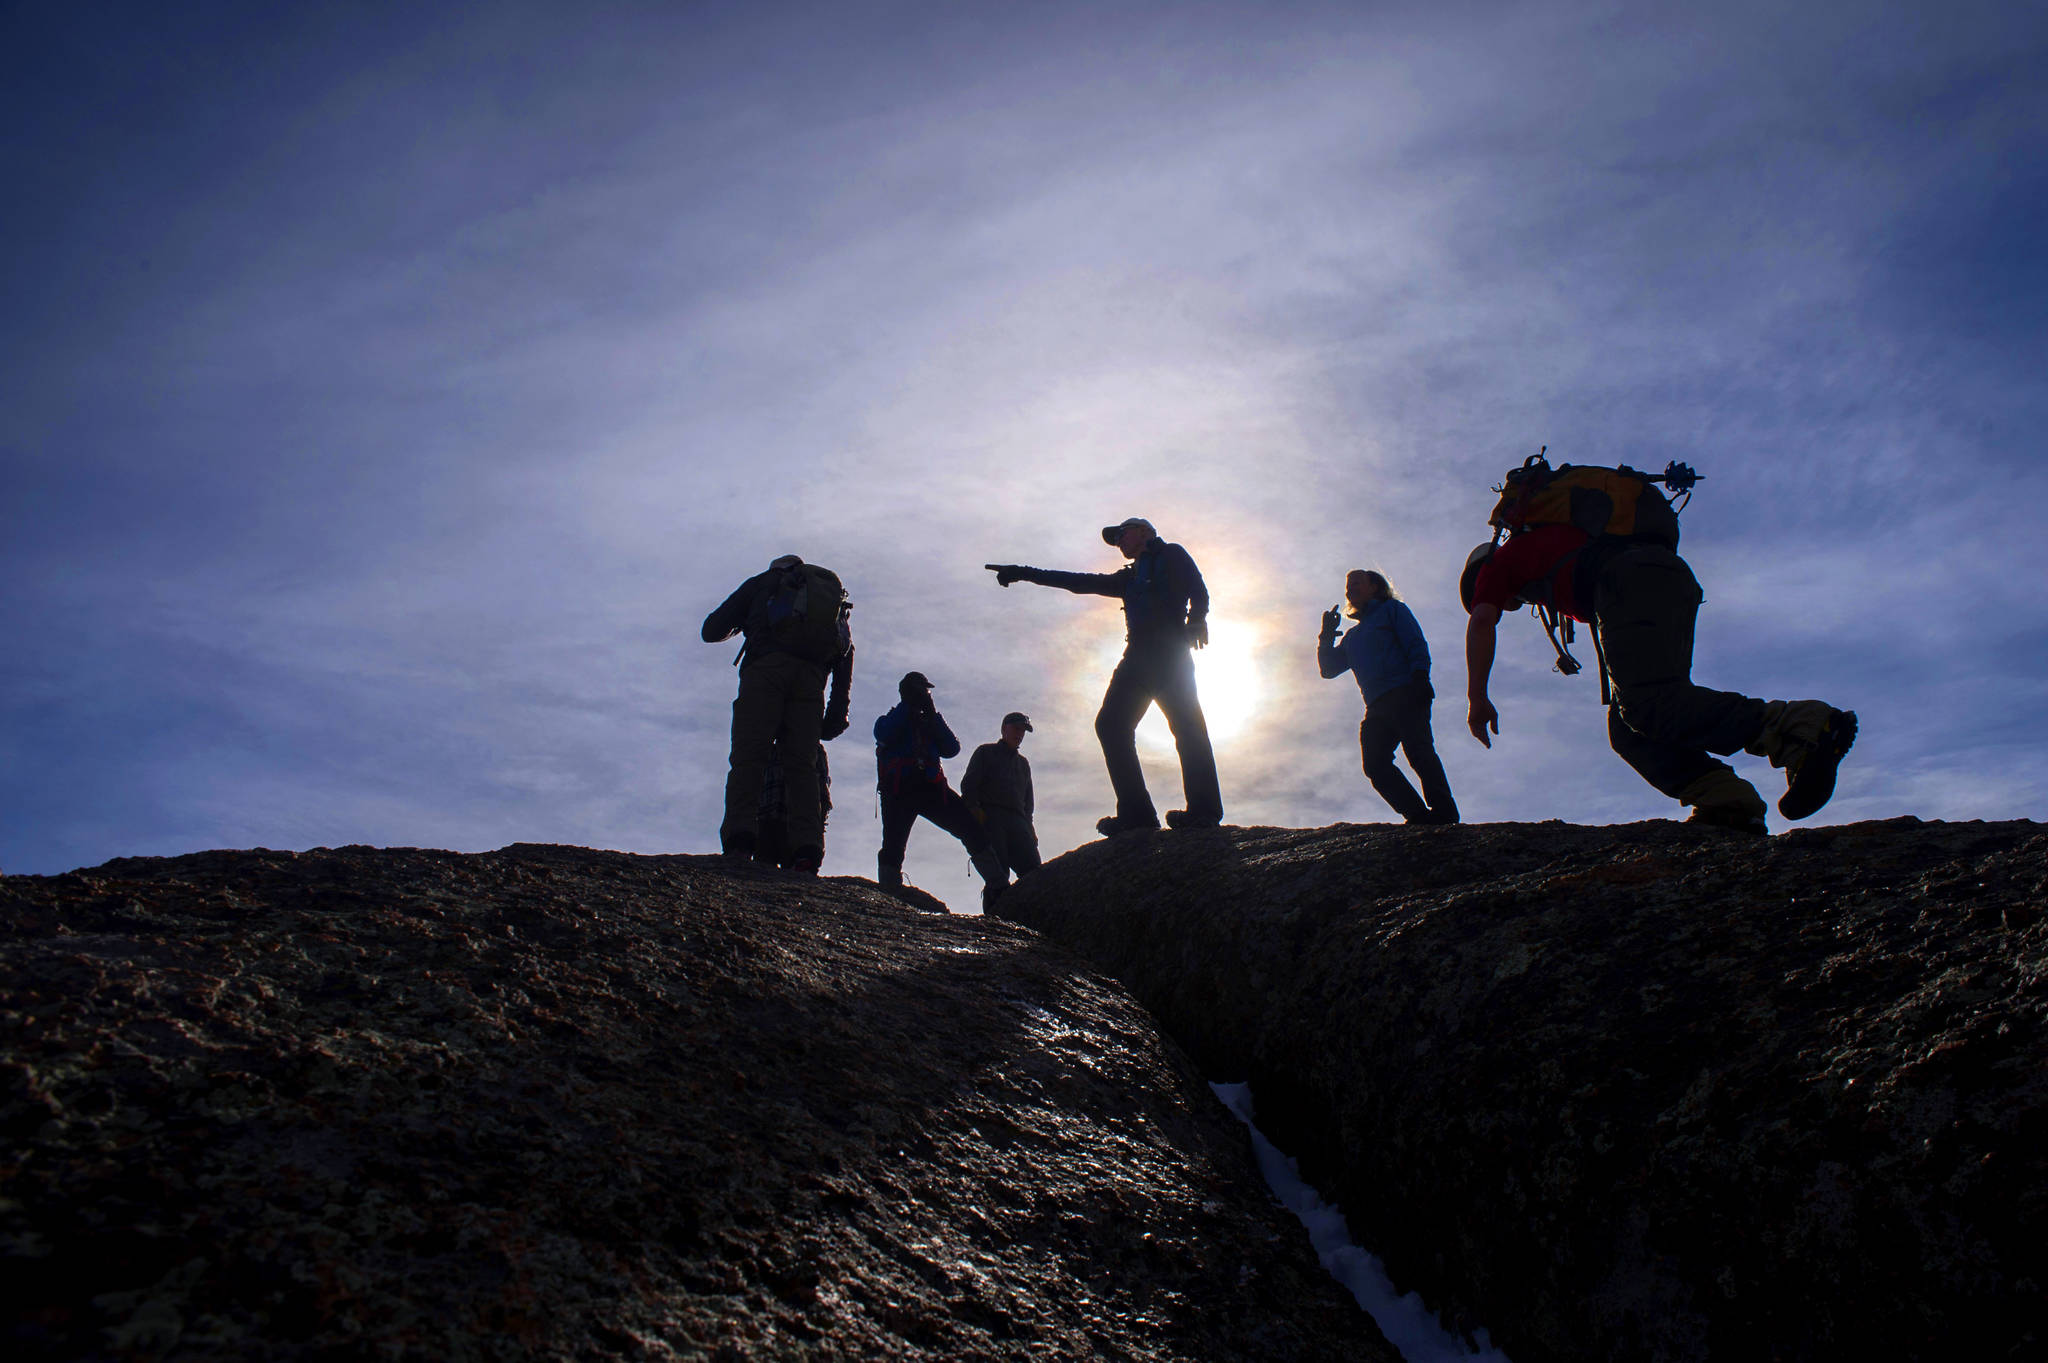 Tony Eichstadt, pointing, and the dozen mountaineers climbing with Eric Swab Tuesday, Jan. 31, 2017, scramble to the summit of Cap Rock near Palmer Lake, Colo., while on their weekly trek exploring the remote and historic spots in the backcountry of the Pikes Peak region. (Christian Murdock/The Gazette via AP)